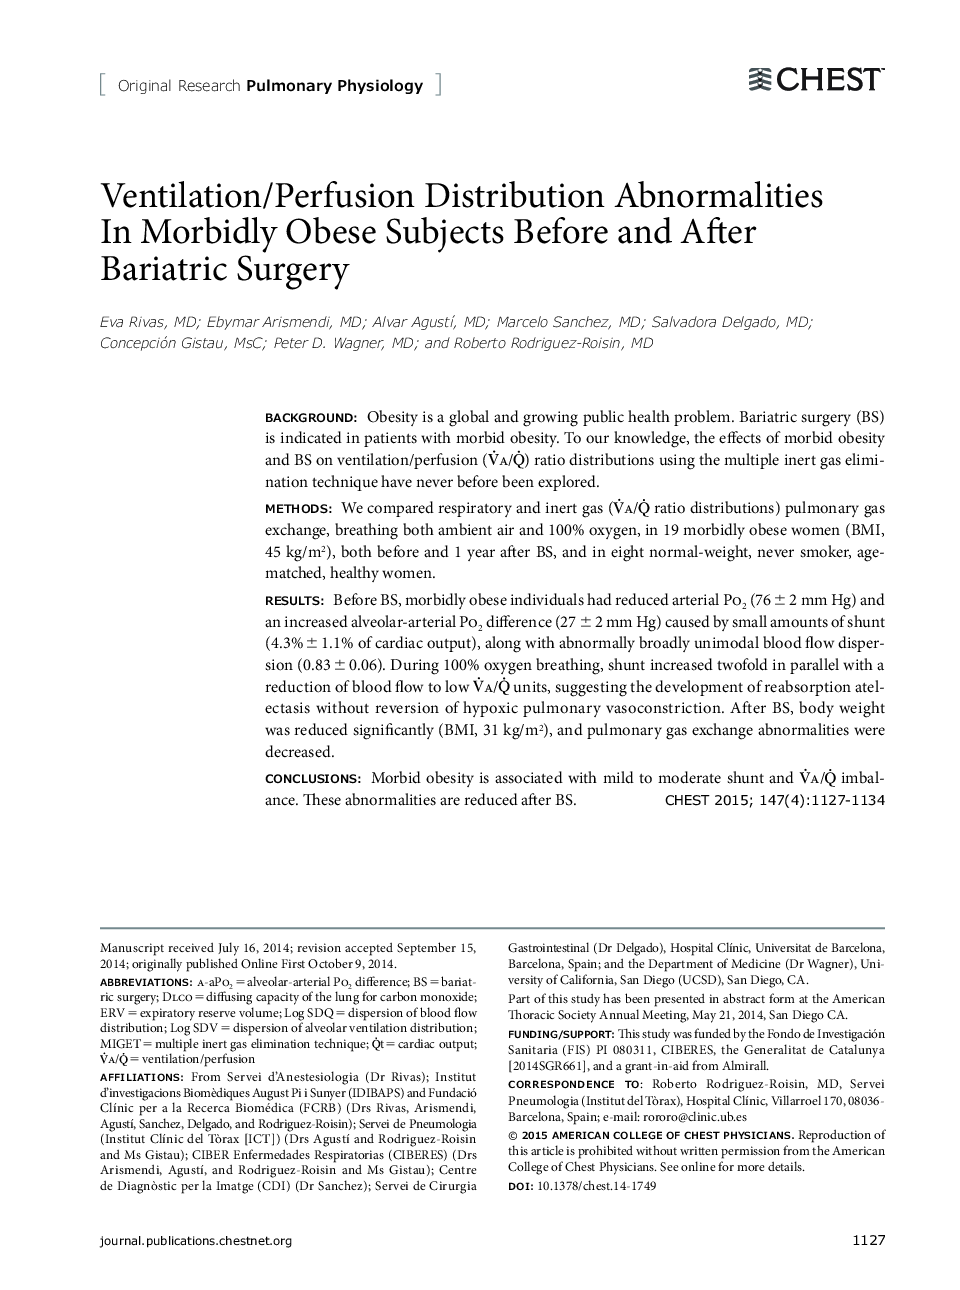 Ventilation/Perfusion Distribution Abnormalities In Morbidly Obese Subjects Before and After Bariatric Surgery 